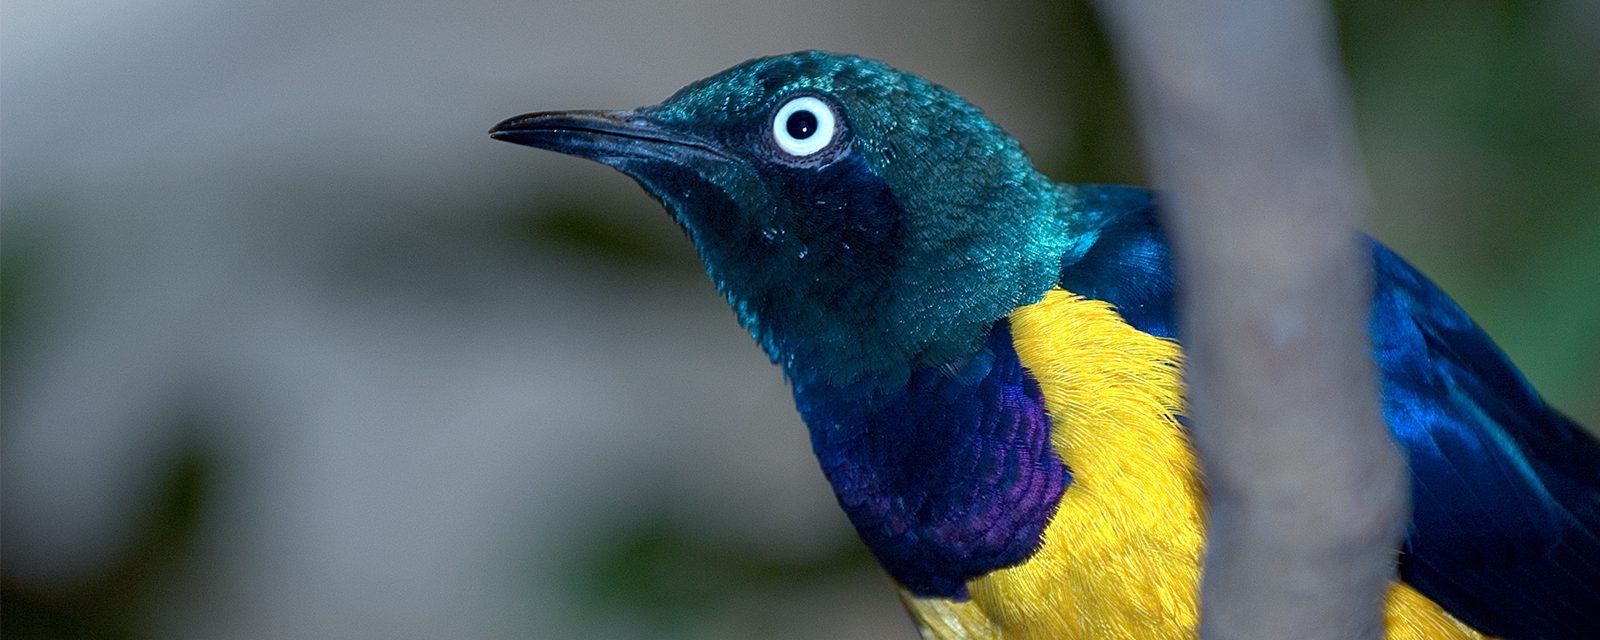 Golden-breasted starling in exhibit